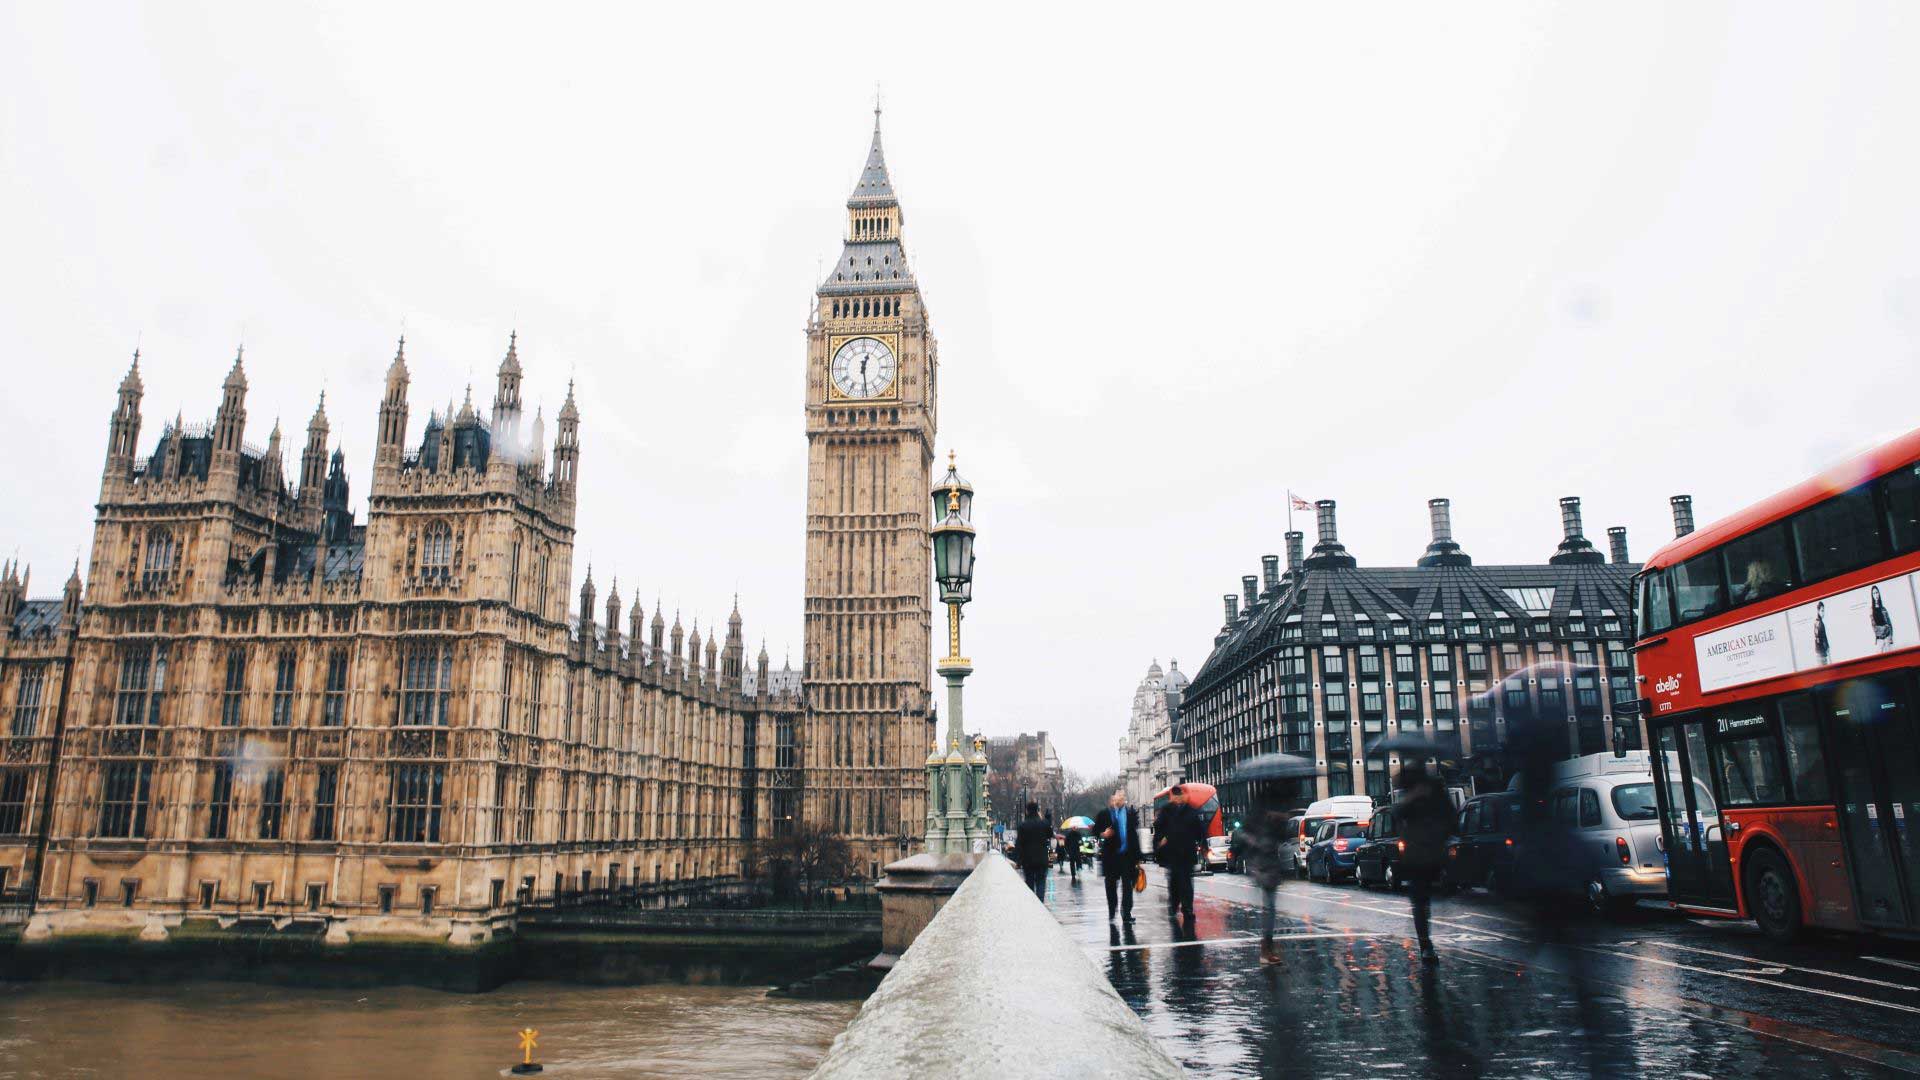 Big Ben and houses of Parliament on a rainy day.